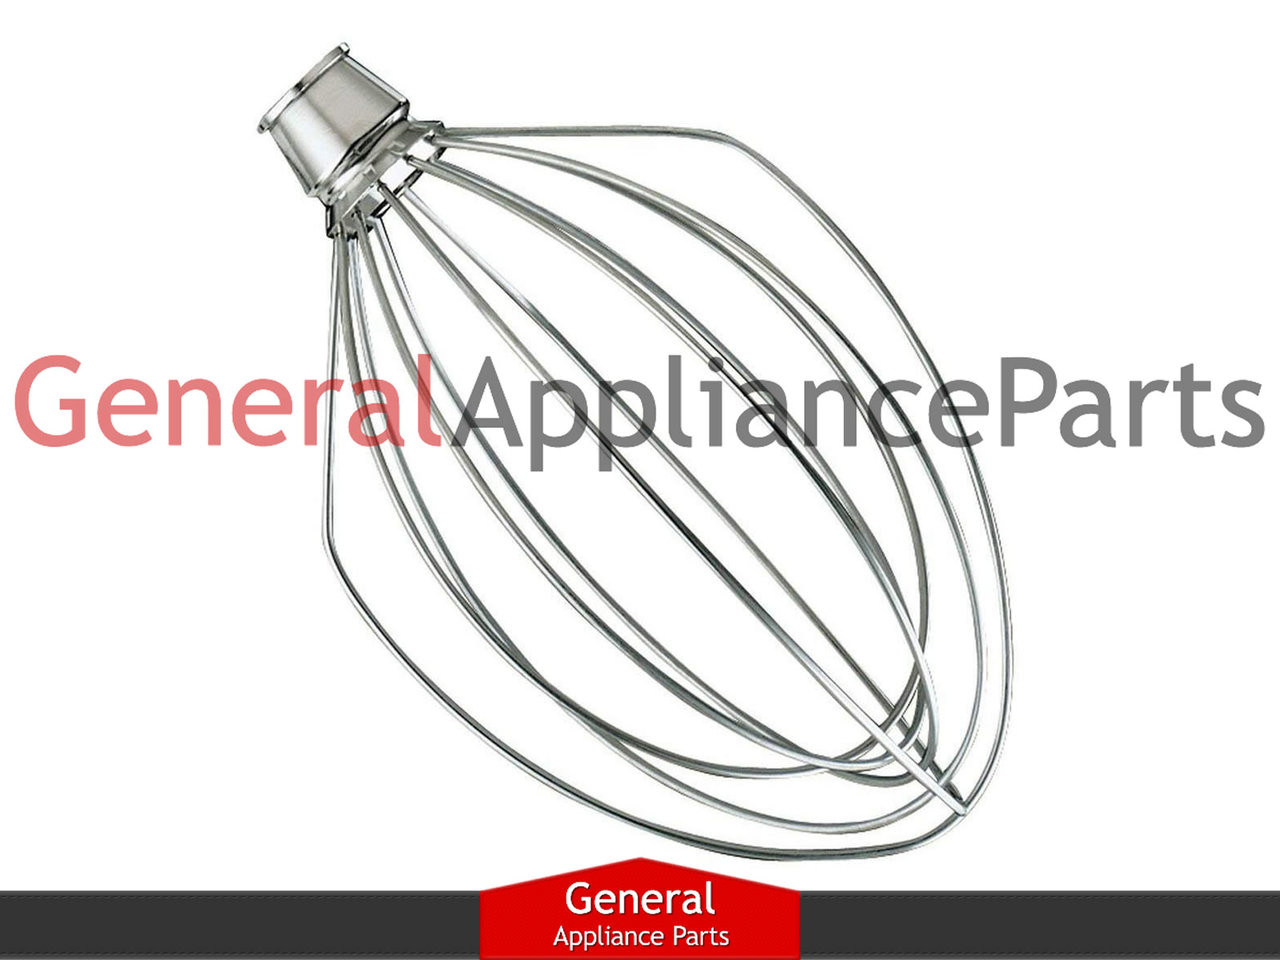 Stand Mixer Wire Whip WP9704329 - OEM KitchenAid 